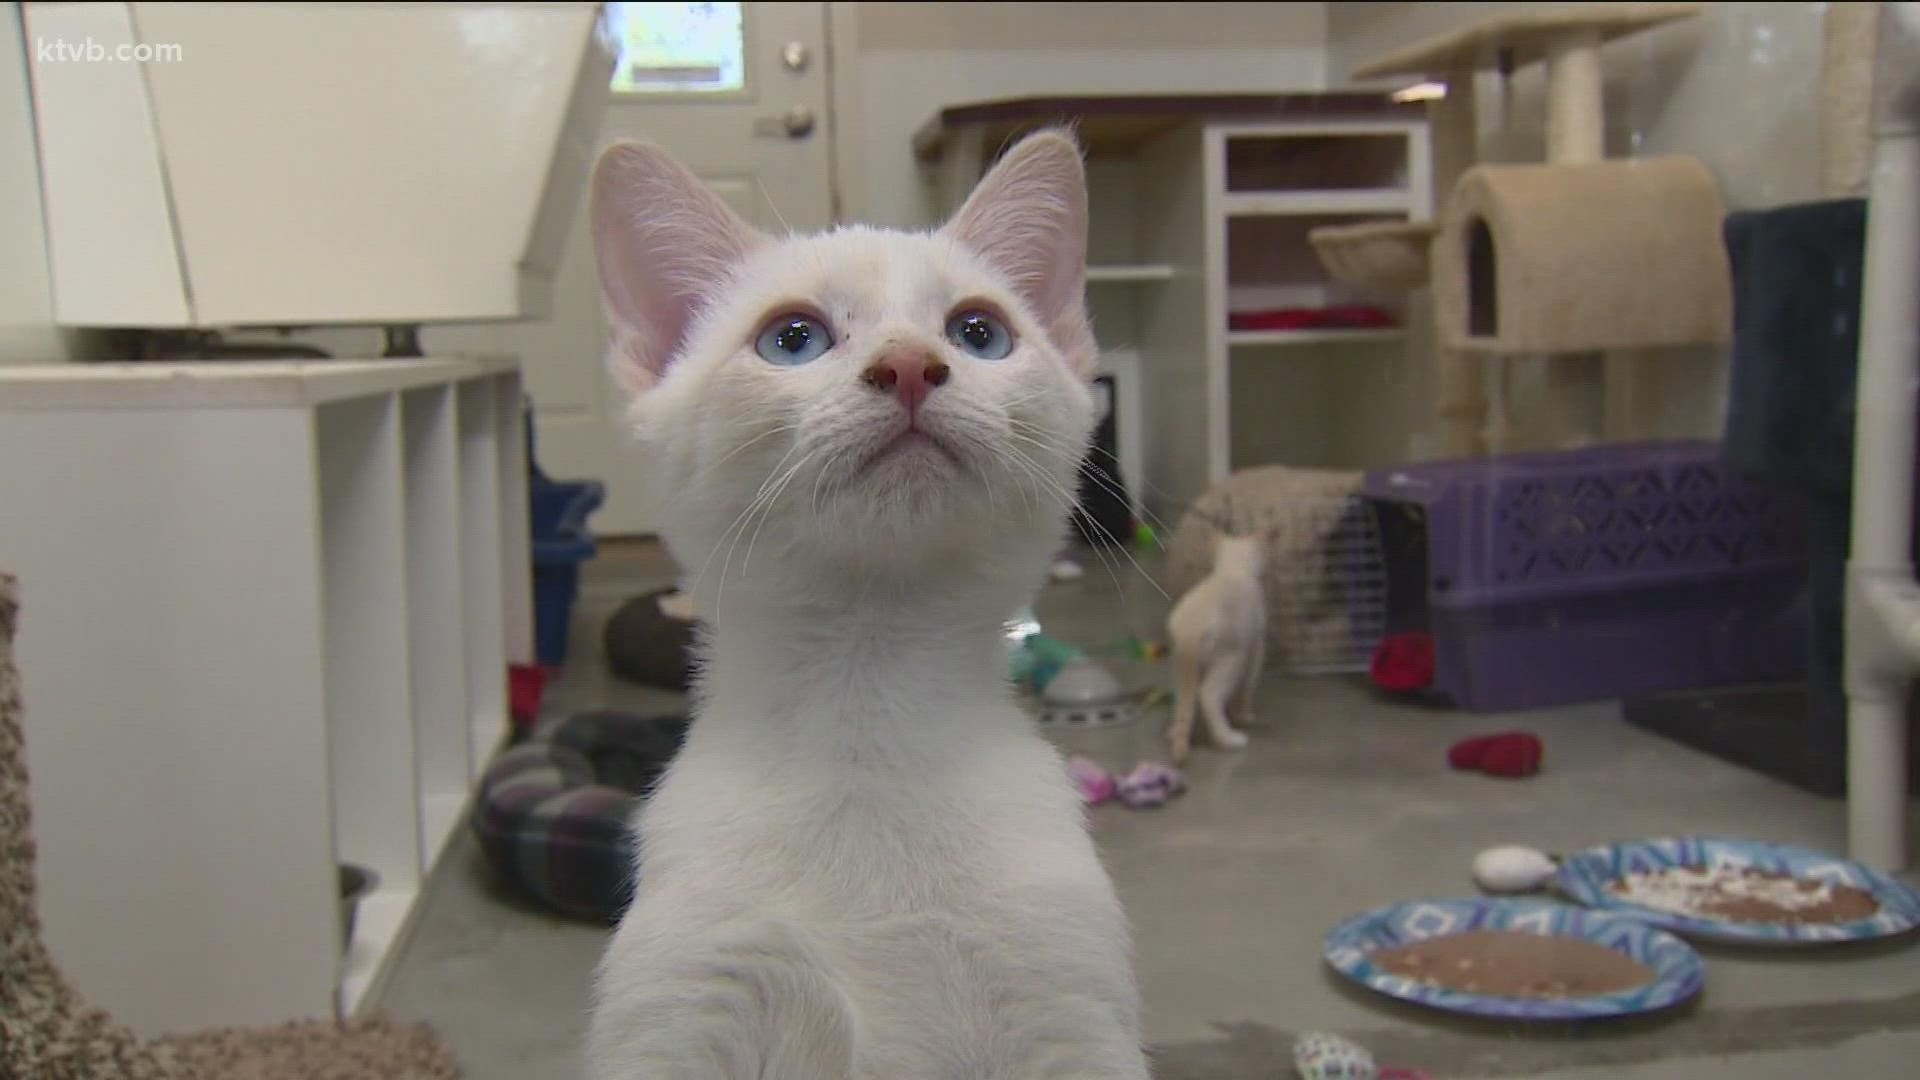 Since January, around 20% of owner surrenders at the Idaho Humane Society have been because of people moving.